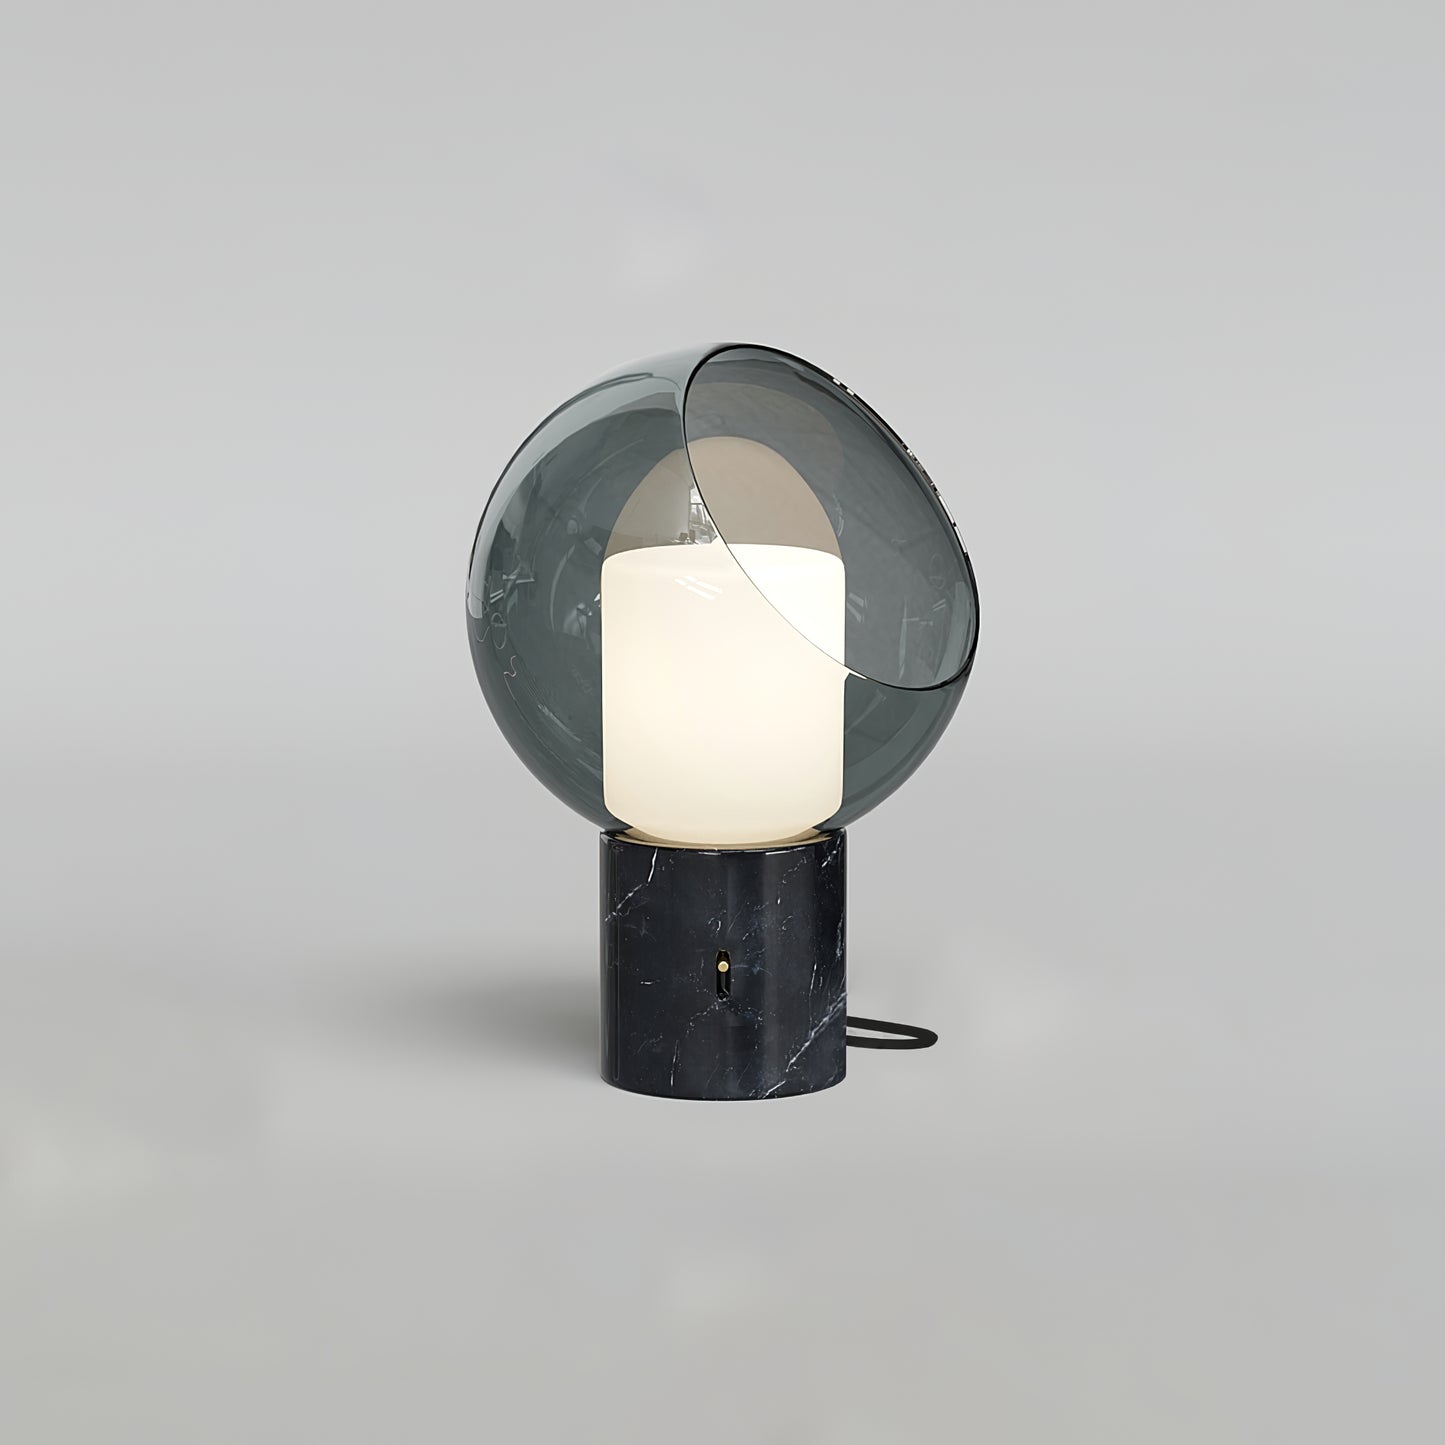 Evedal Table Lamp